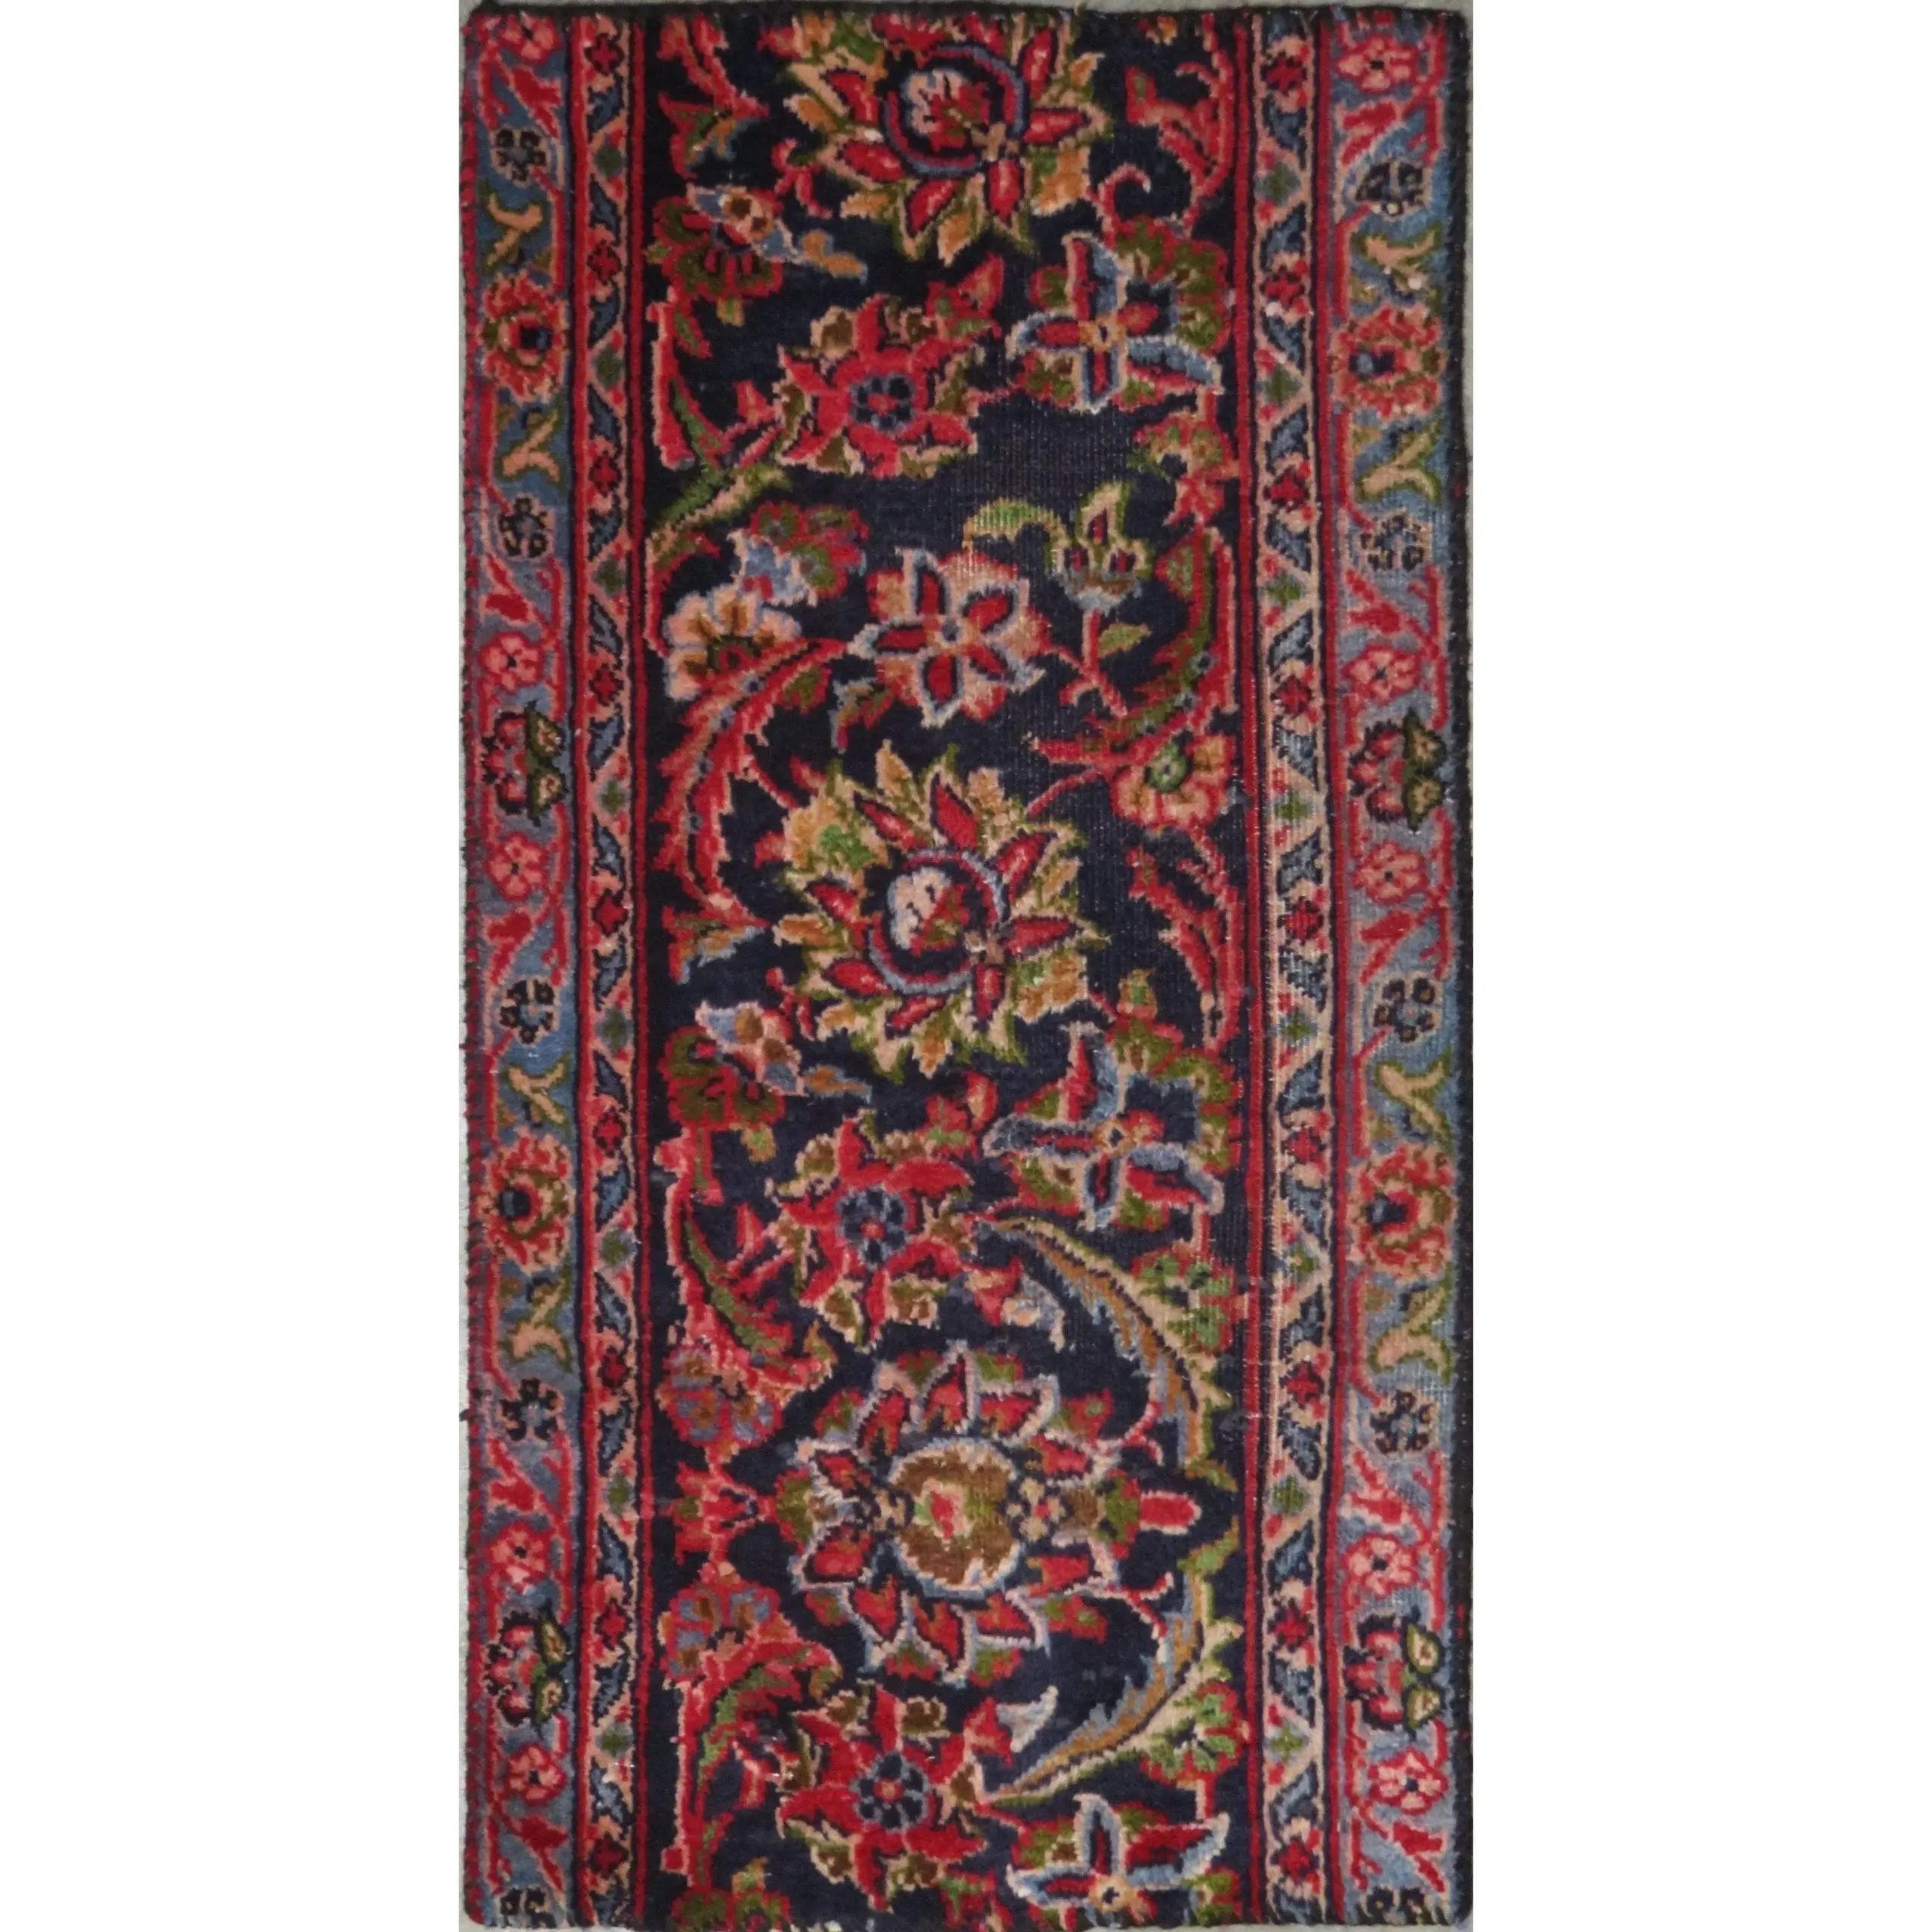 Hand-Knotted Persian Wool Rug _ Luxurious Vintage Design, 2'0" x 1'0", Artisan Crafted